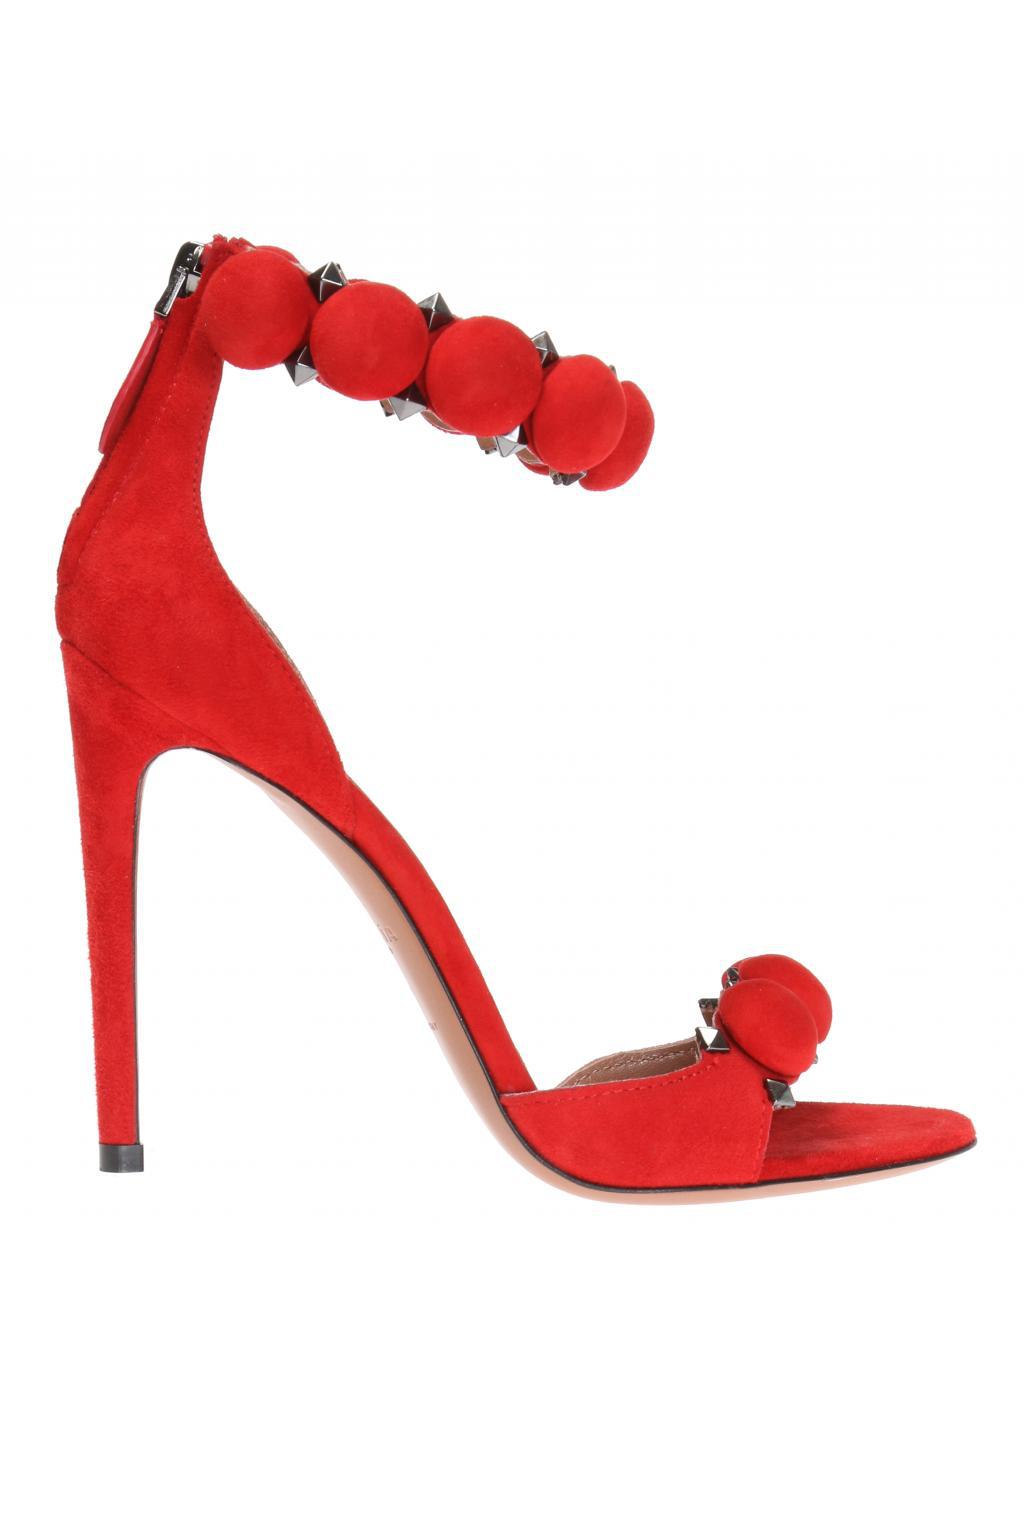 Alaïa Heeled Suede Sandals in Red - Save 27% - Lyst